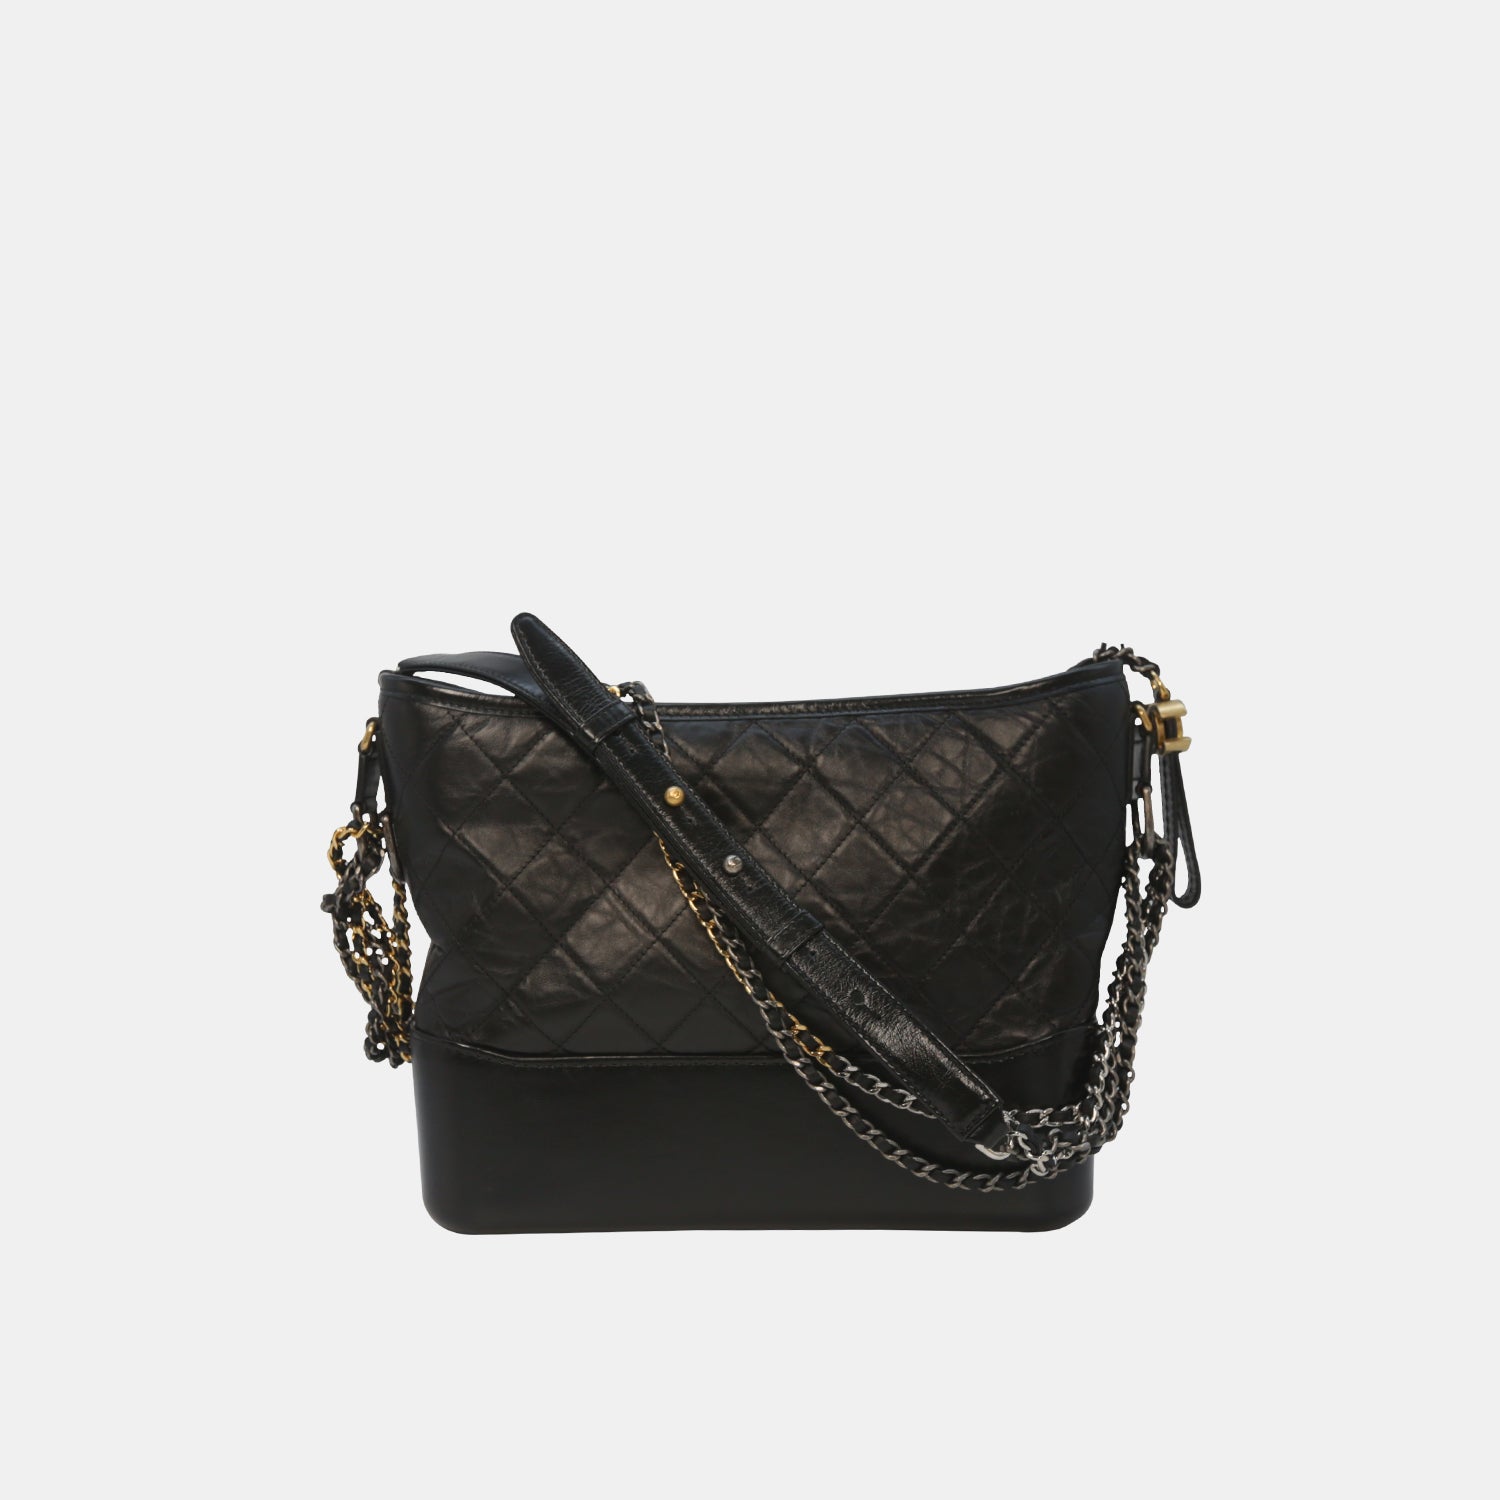 CHANEL Large Gabrielle Hobo Bag – JDEX Styles